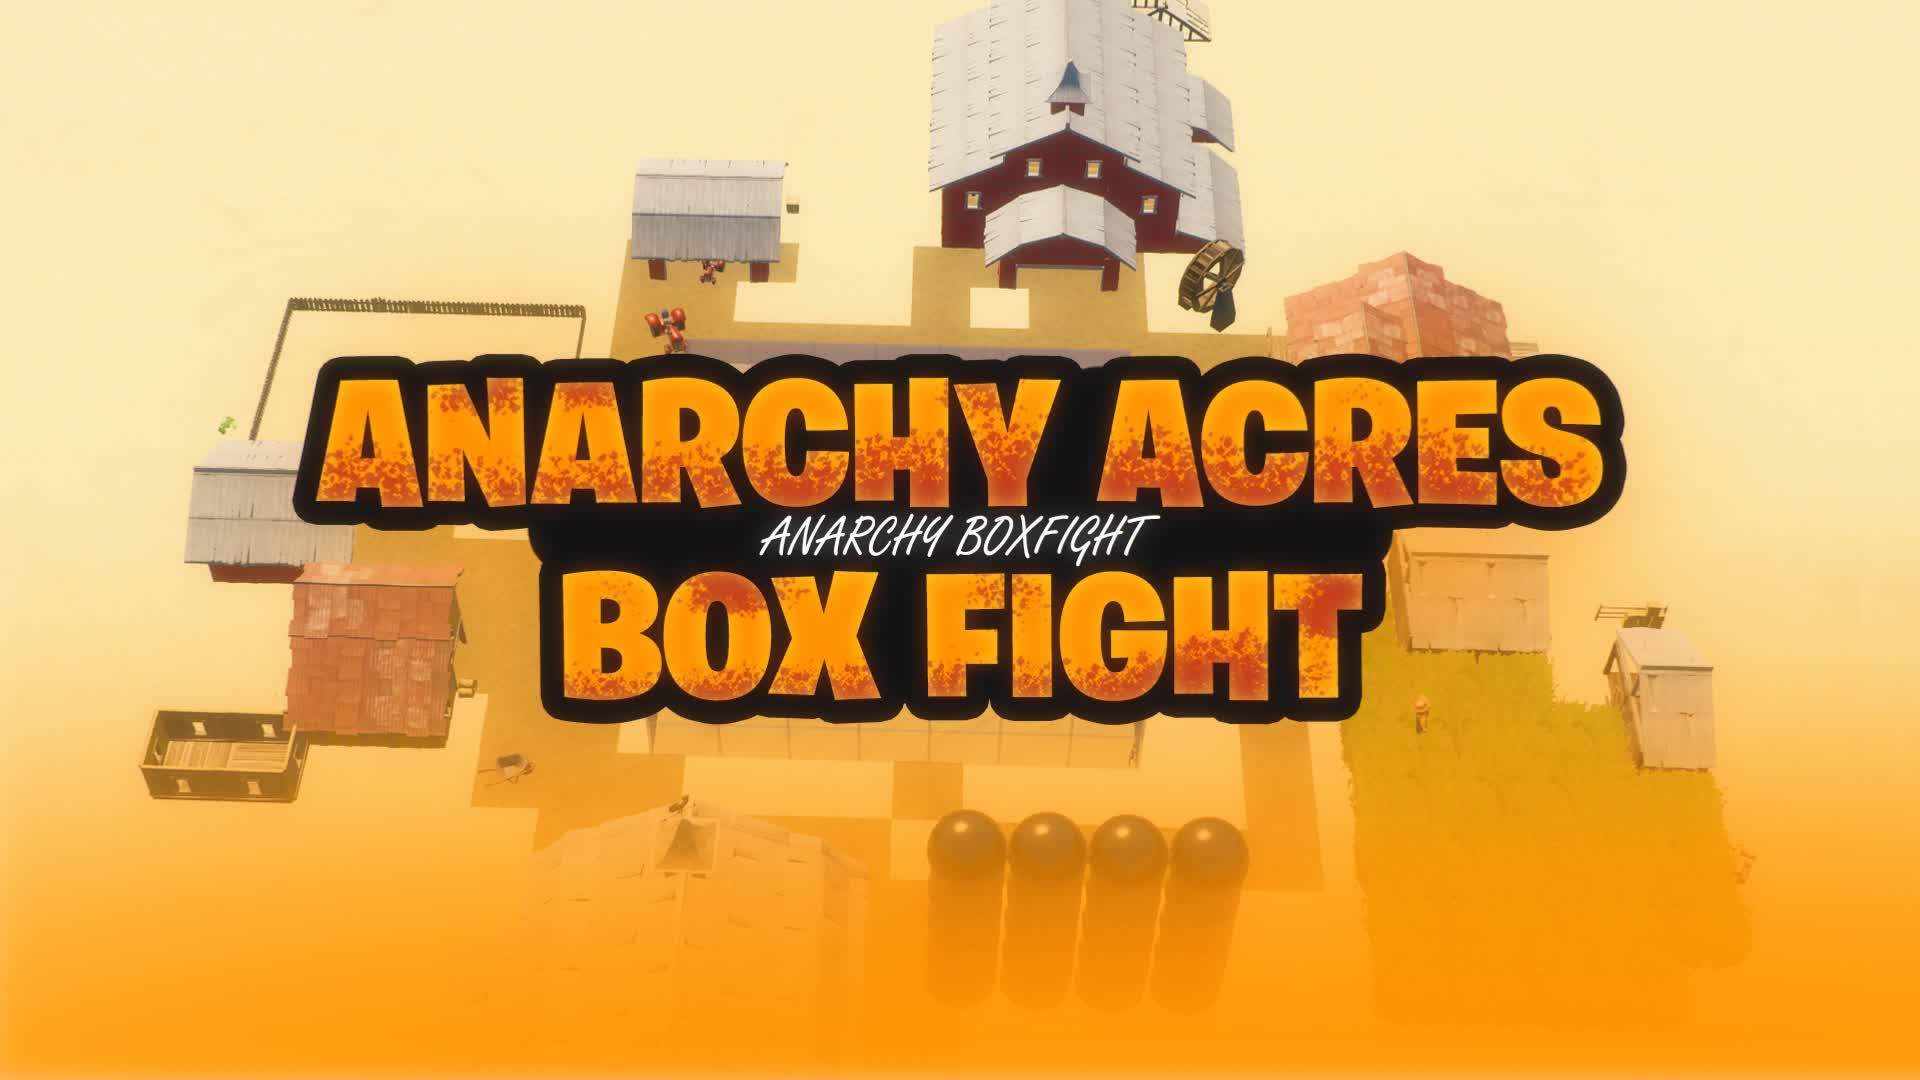 ANARCHY ACRES BOX FIGHT